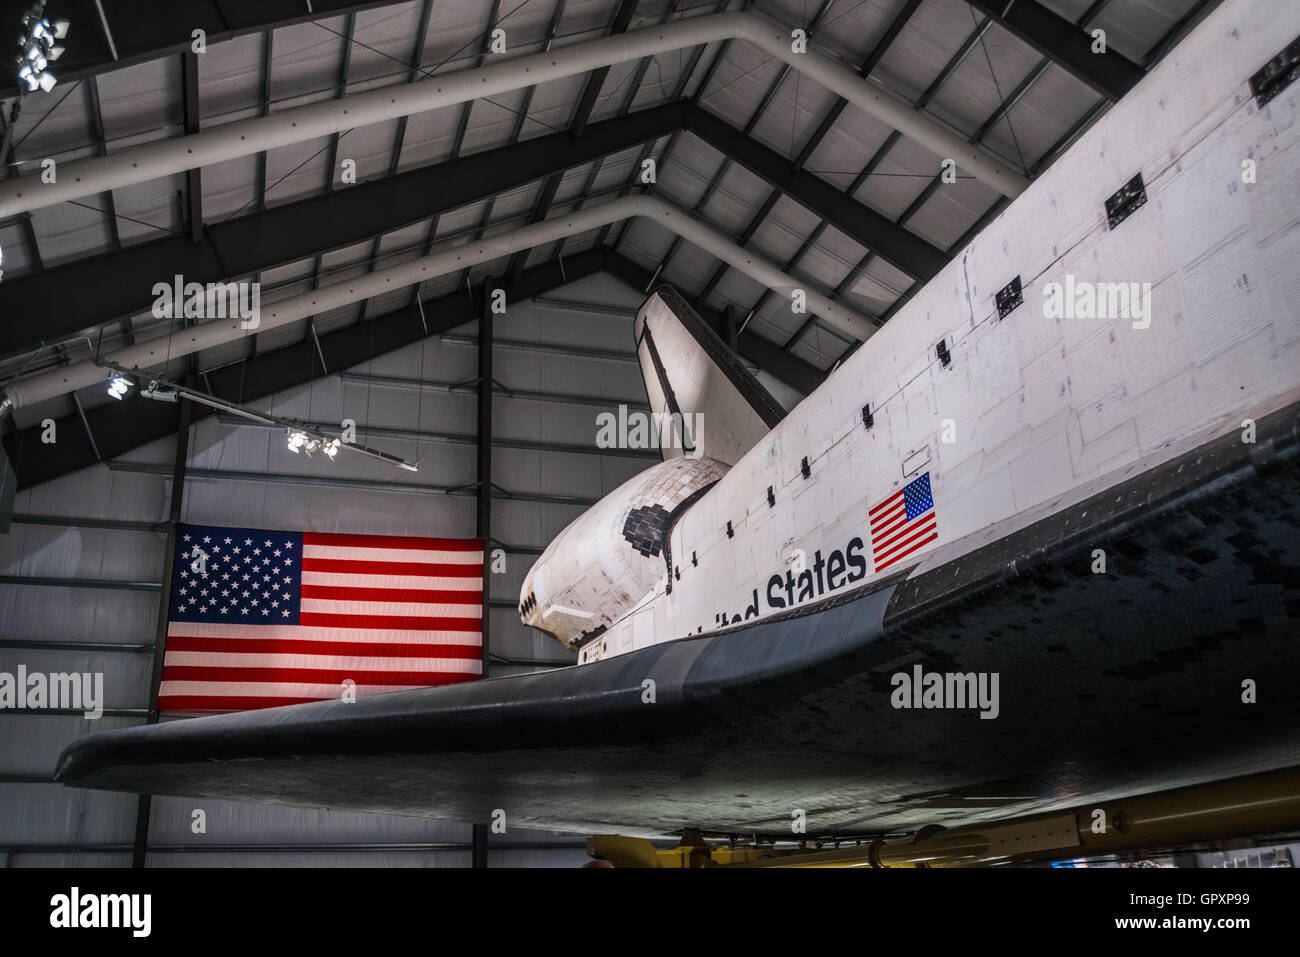 Endeavour Space Shuttle in California Science Center Stock Photo